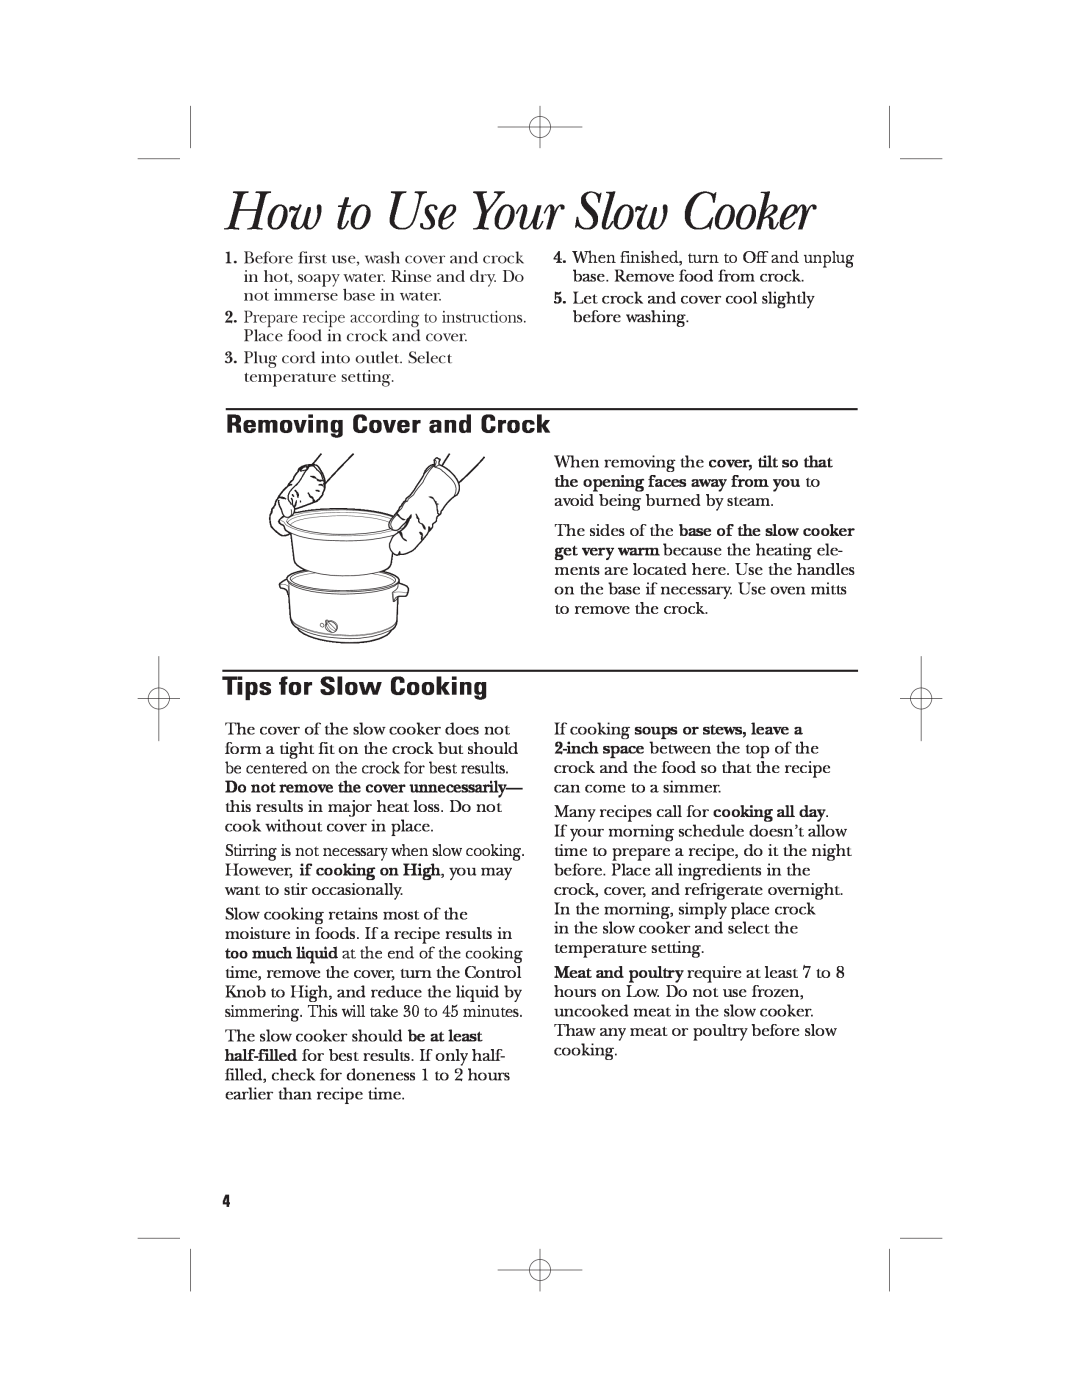 GE 169016 manual How to Use Your Slow Cooker, Removing Cover and Crock, Tips for Slow Cooking 